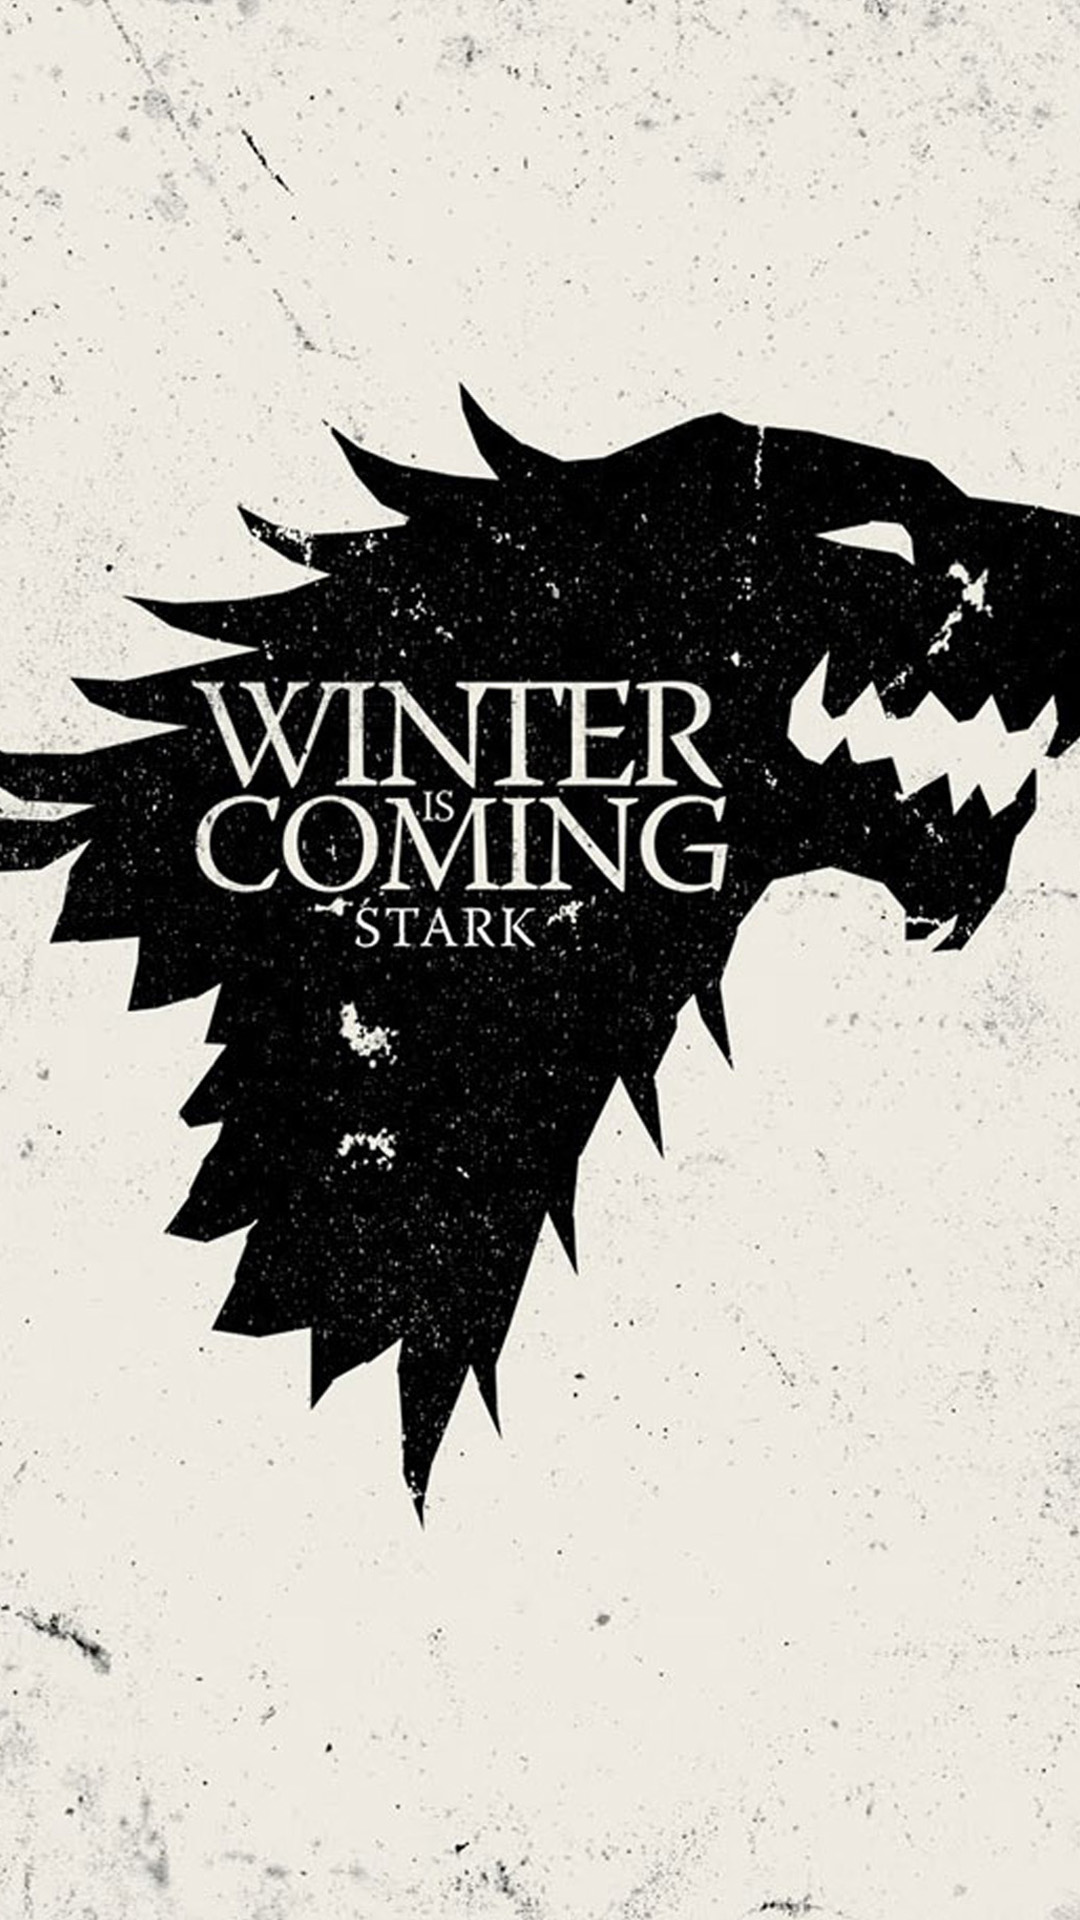 Winter is Coming Htc One M8 wallpaper Htc One M8 Wallpaper